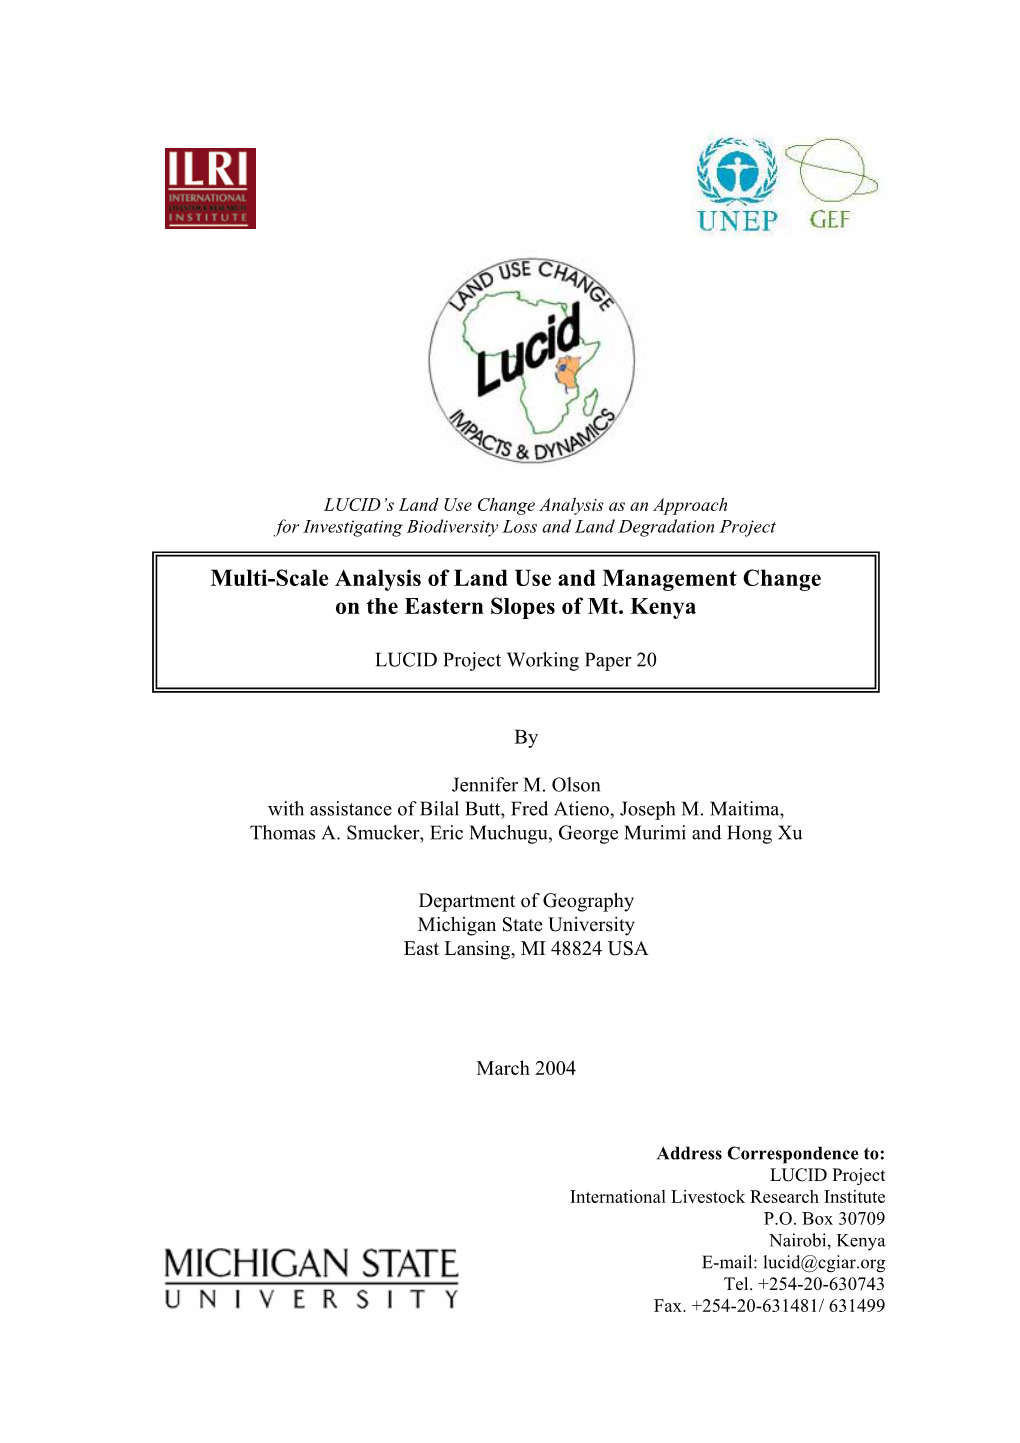 Multi-Scale Analysis of Land Use and Management Change on the Eastern Slopes of Mt